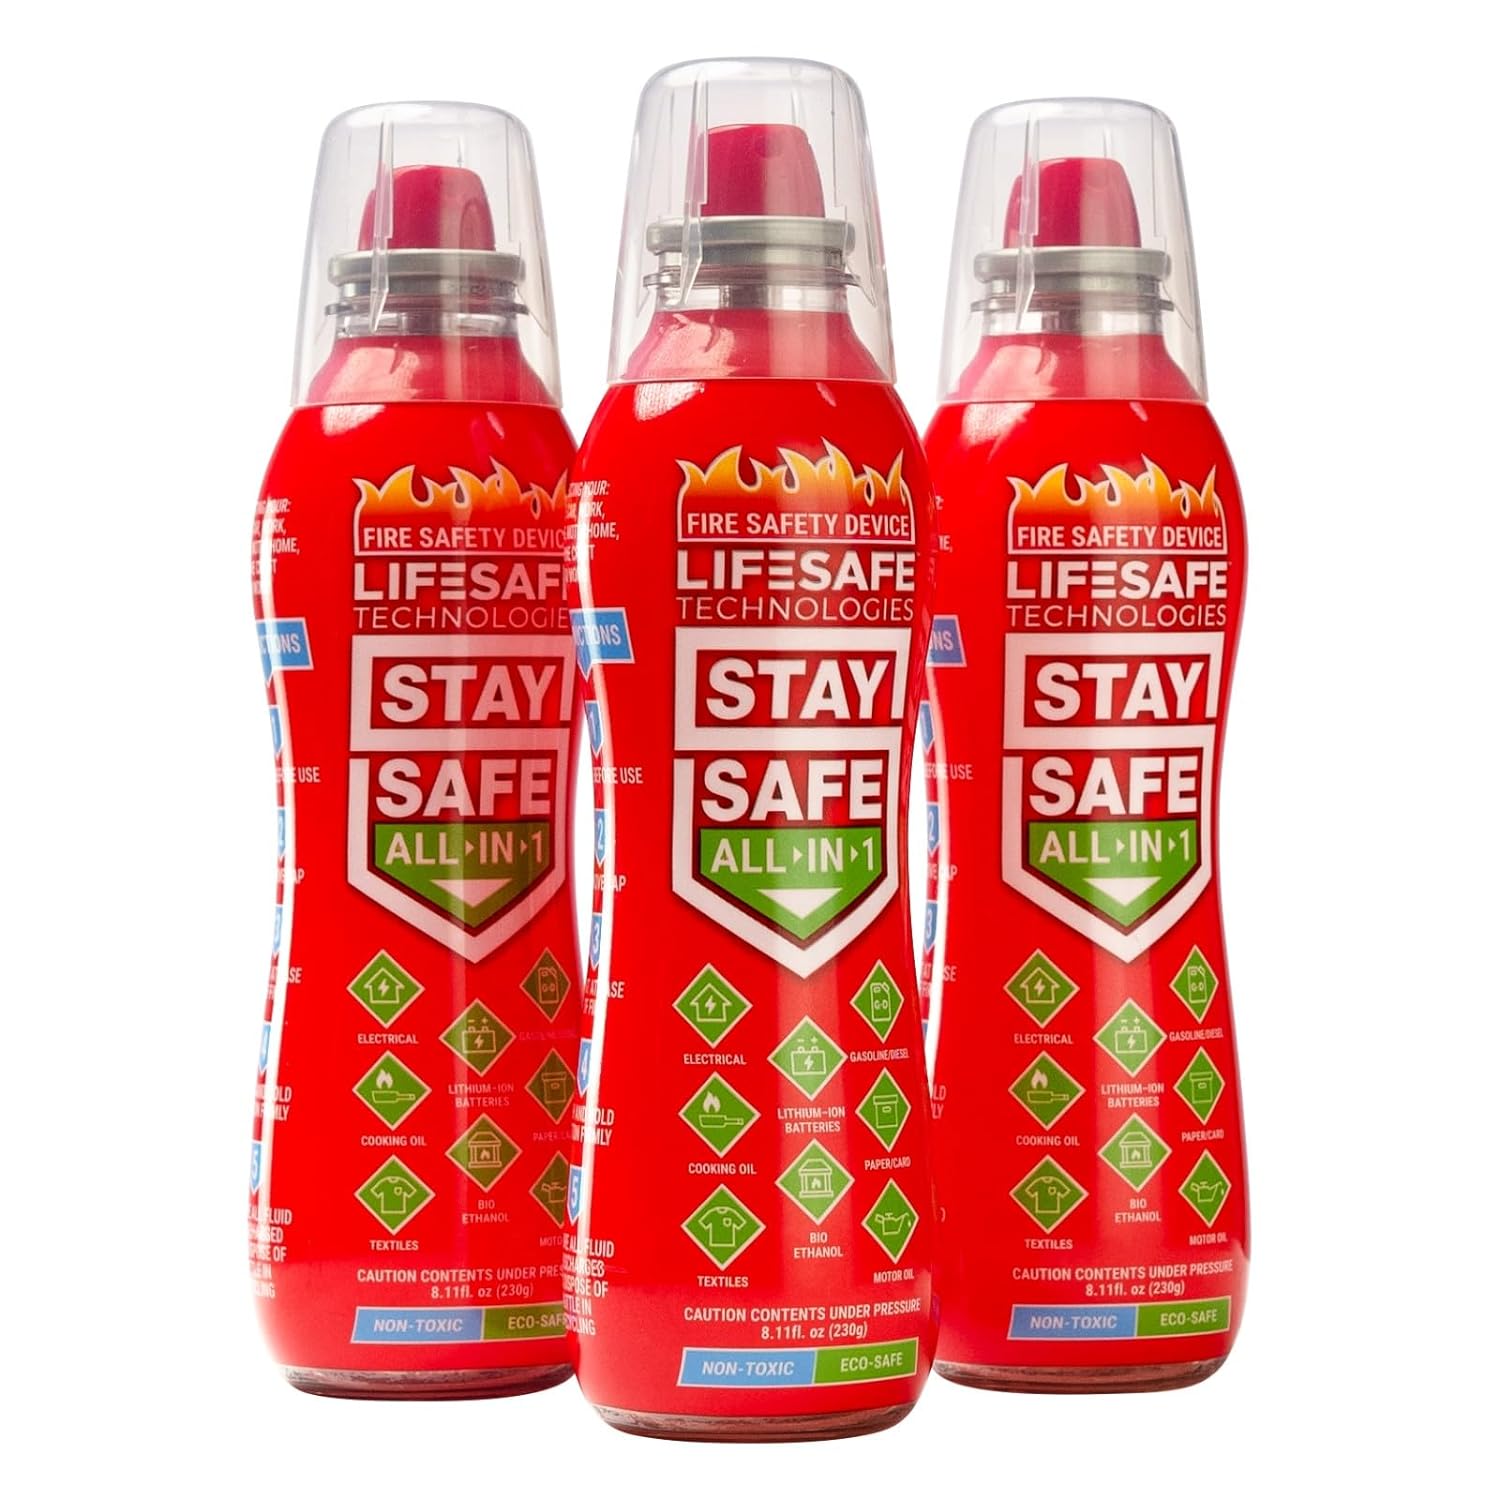 StaySafe - All-in-1 Fire Extinguisher, 3 Pack